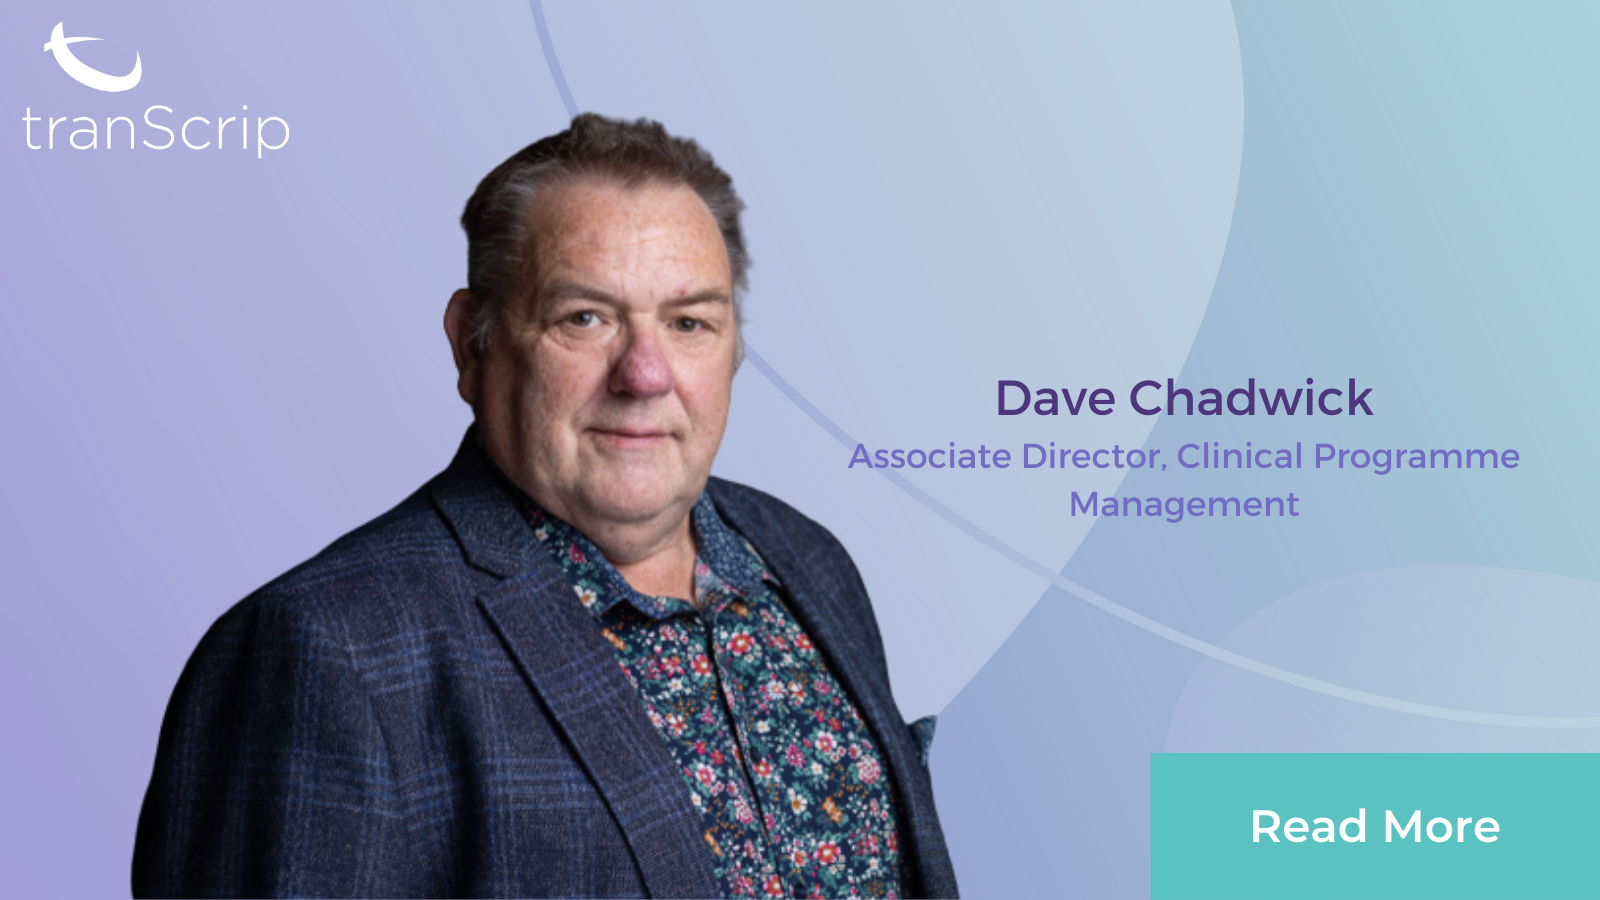 Dave Chadwick joins tranScrip as Associate Director, Clinical Programme Management. Featured Image